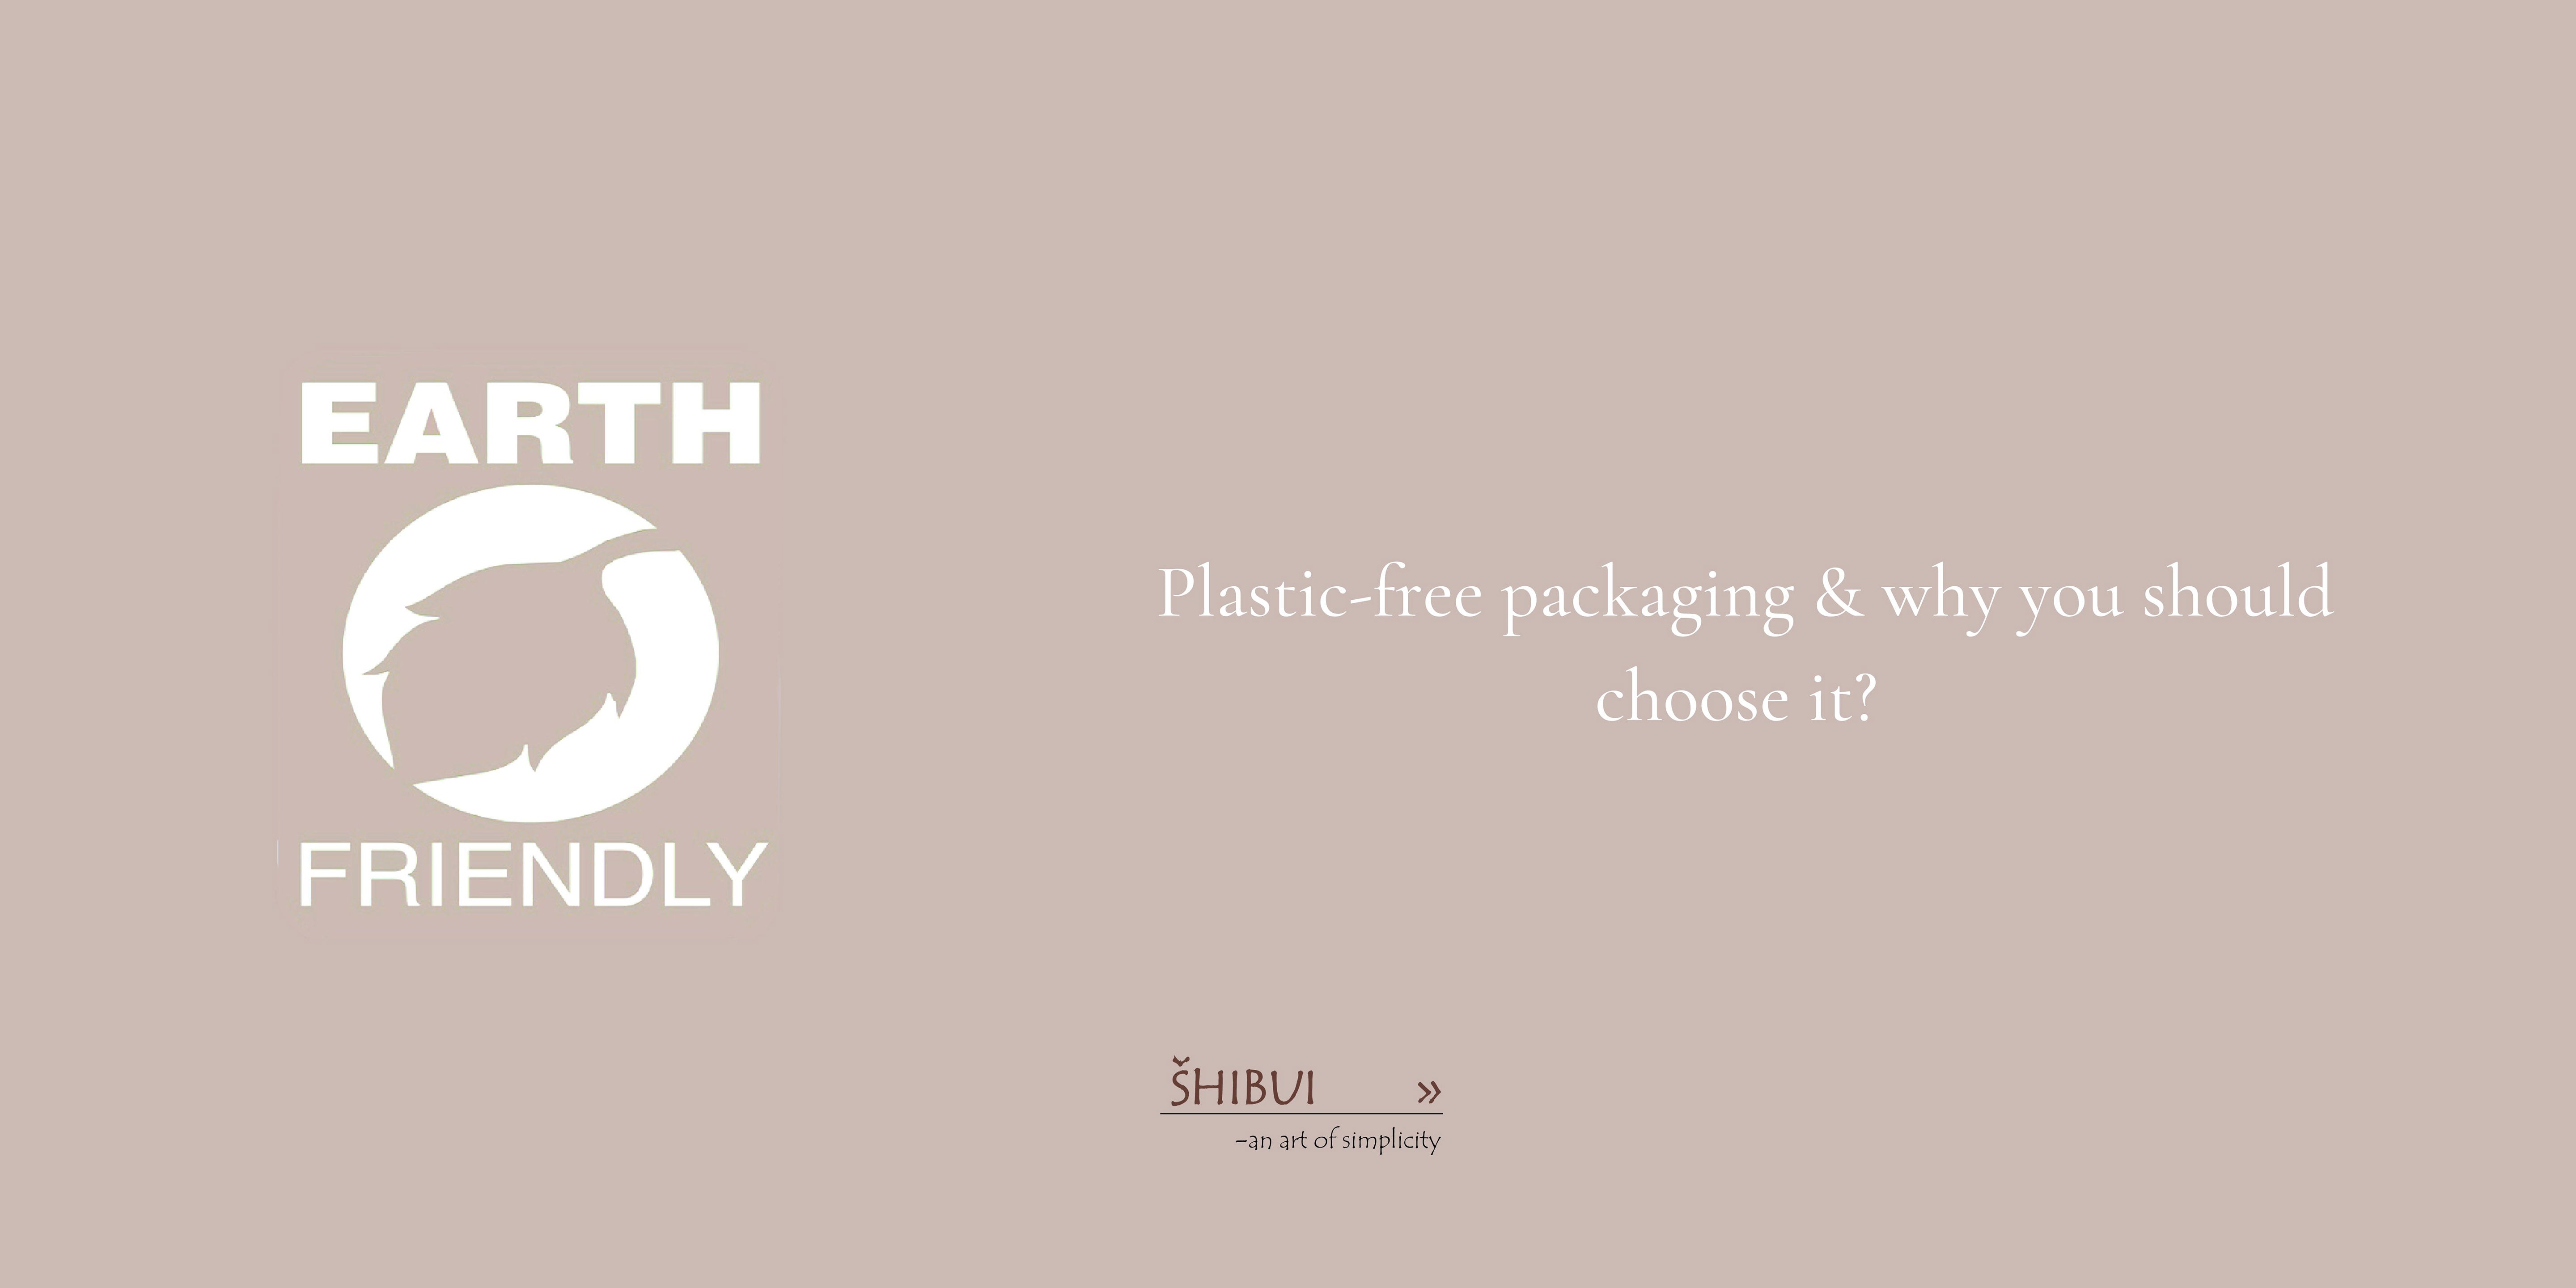 PLASTIC-FREE PACKAGING & WHY YOU SHOULD CHOOSE IT?